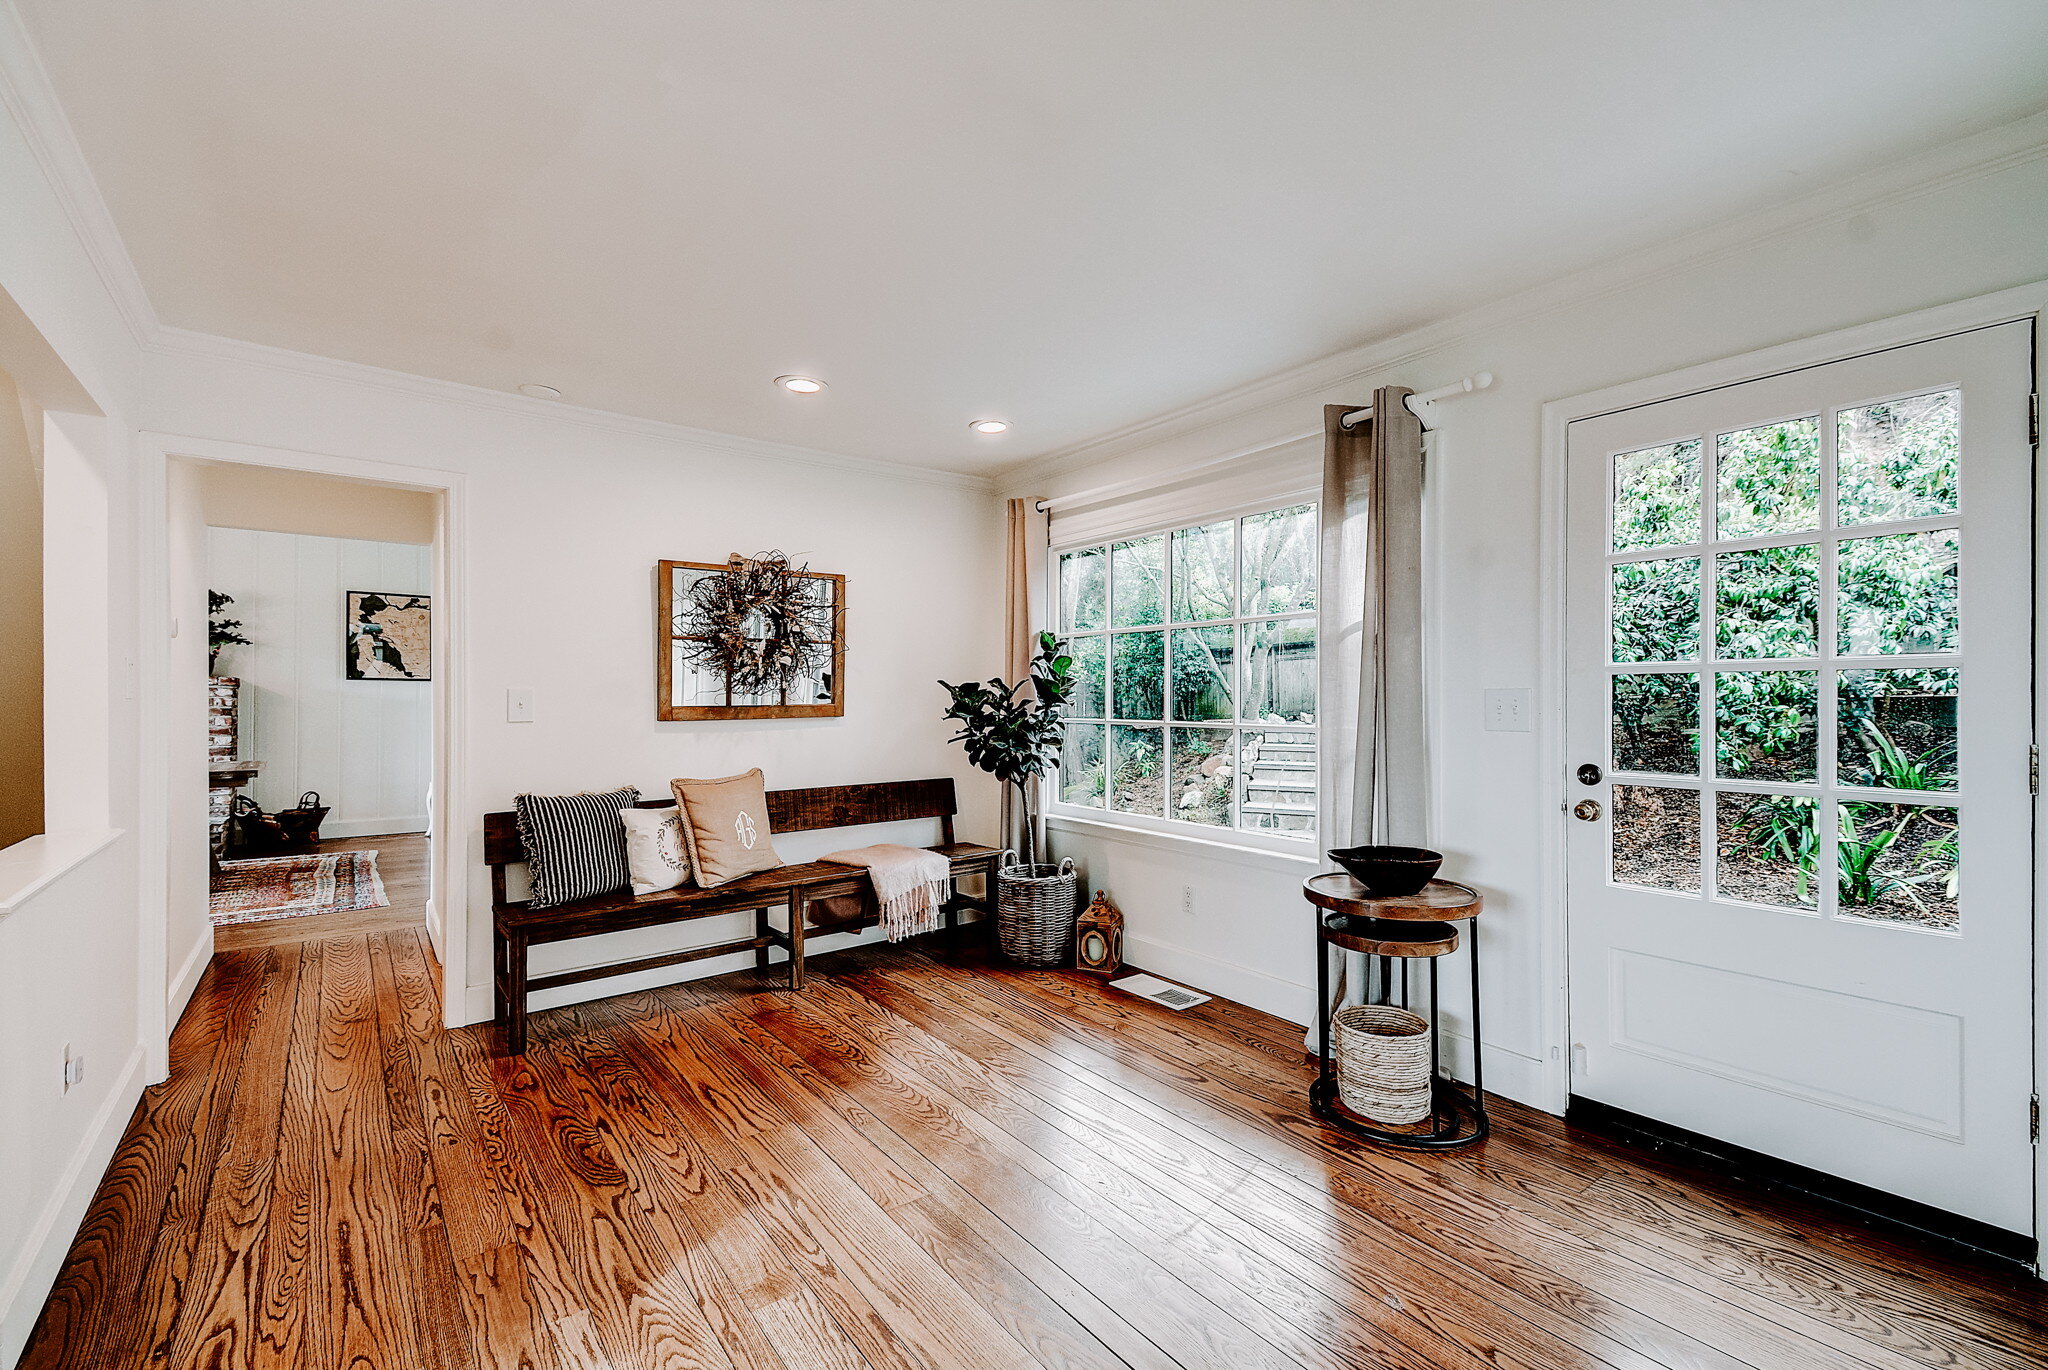 500 Edgewood Avenue-2- Mill Valley Real Estate - Listed by Allie Fornesi Top Mill Valley Realtor.jpg